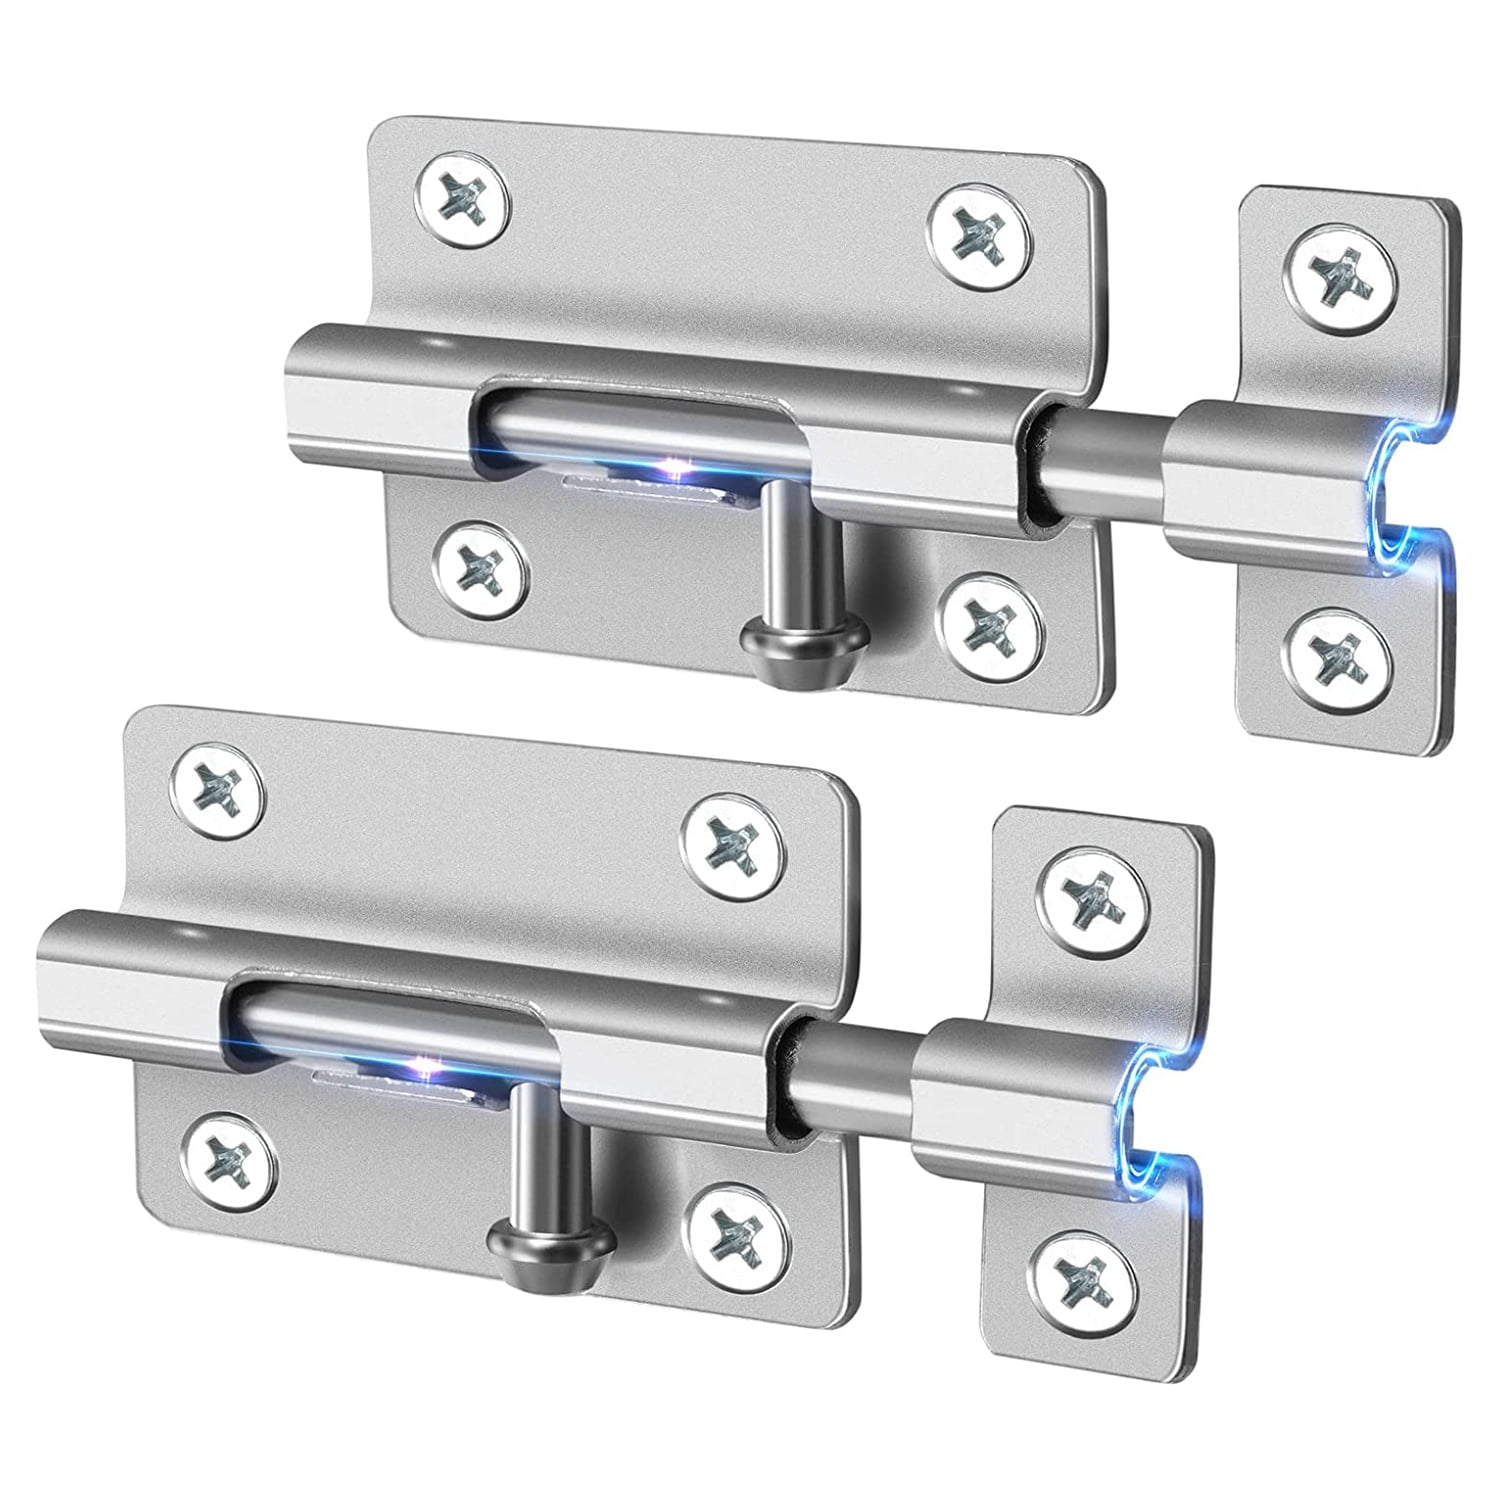 HELEMAN Door Security Slide Latch Lock with 12 Screws 2 Pack Keyless Entry Thickened Heavy Duty Steel Sliding Easy to Install Gate, Silver